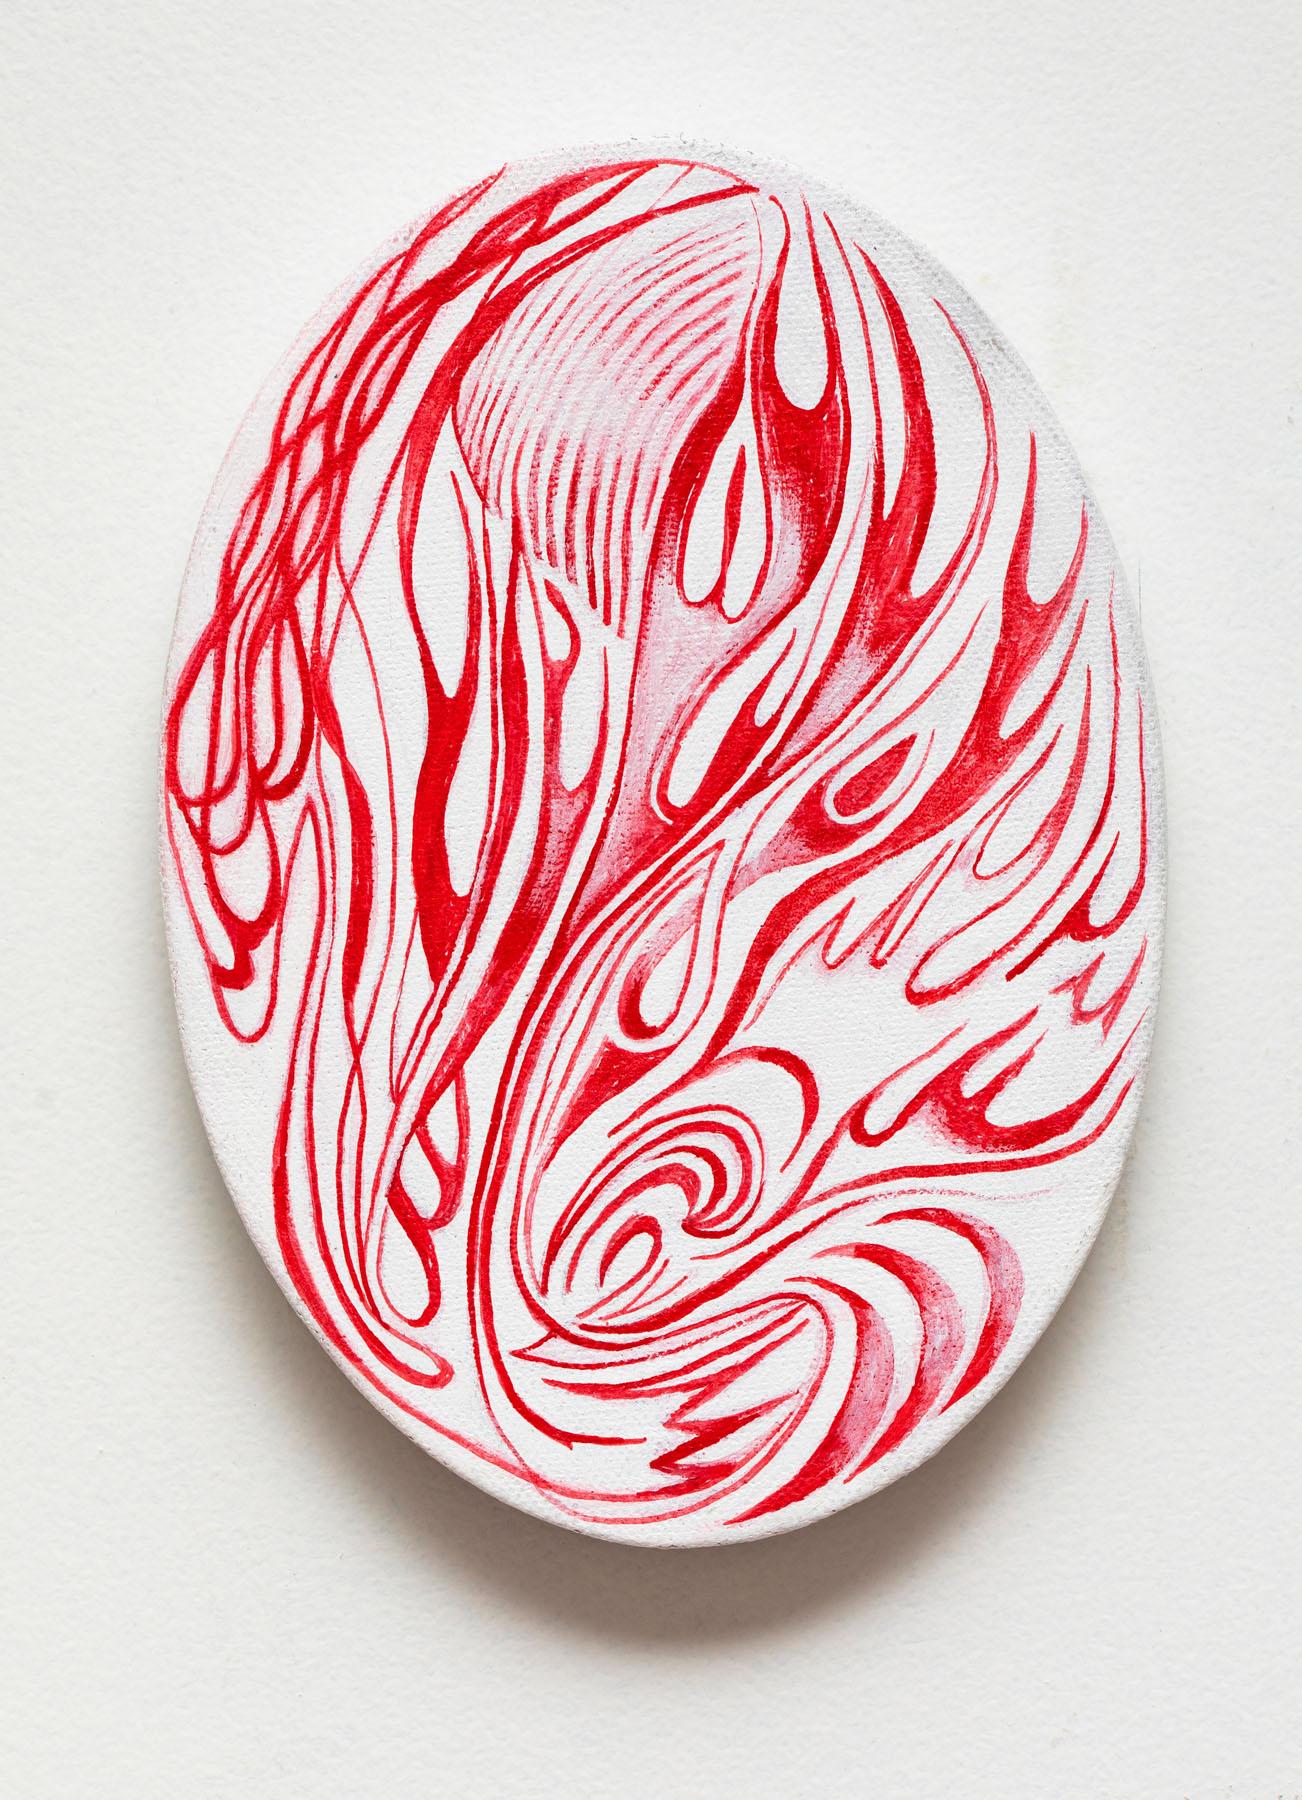 Jim Denney Abstract Painting - Fire Oval 1, abstracted flames, red and white painting on oval canvas